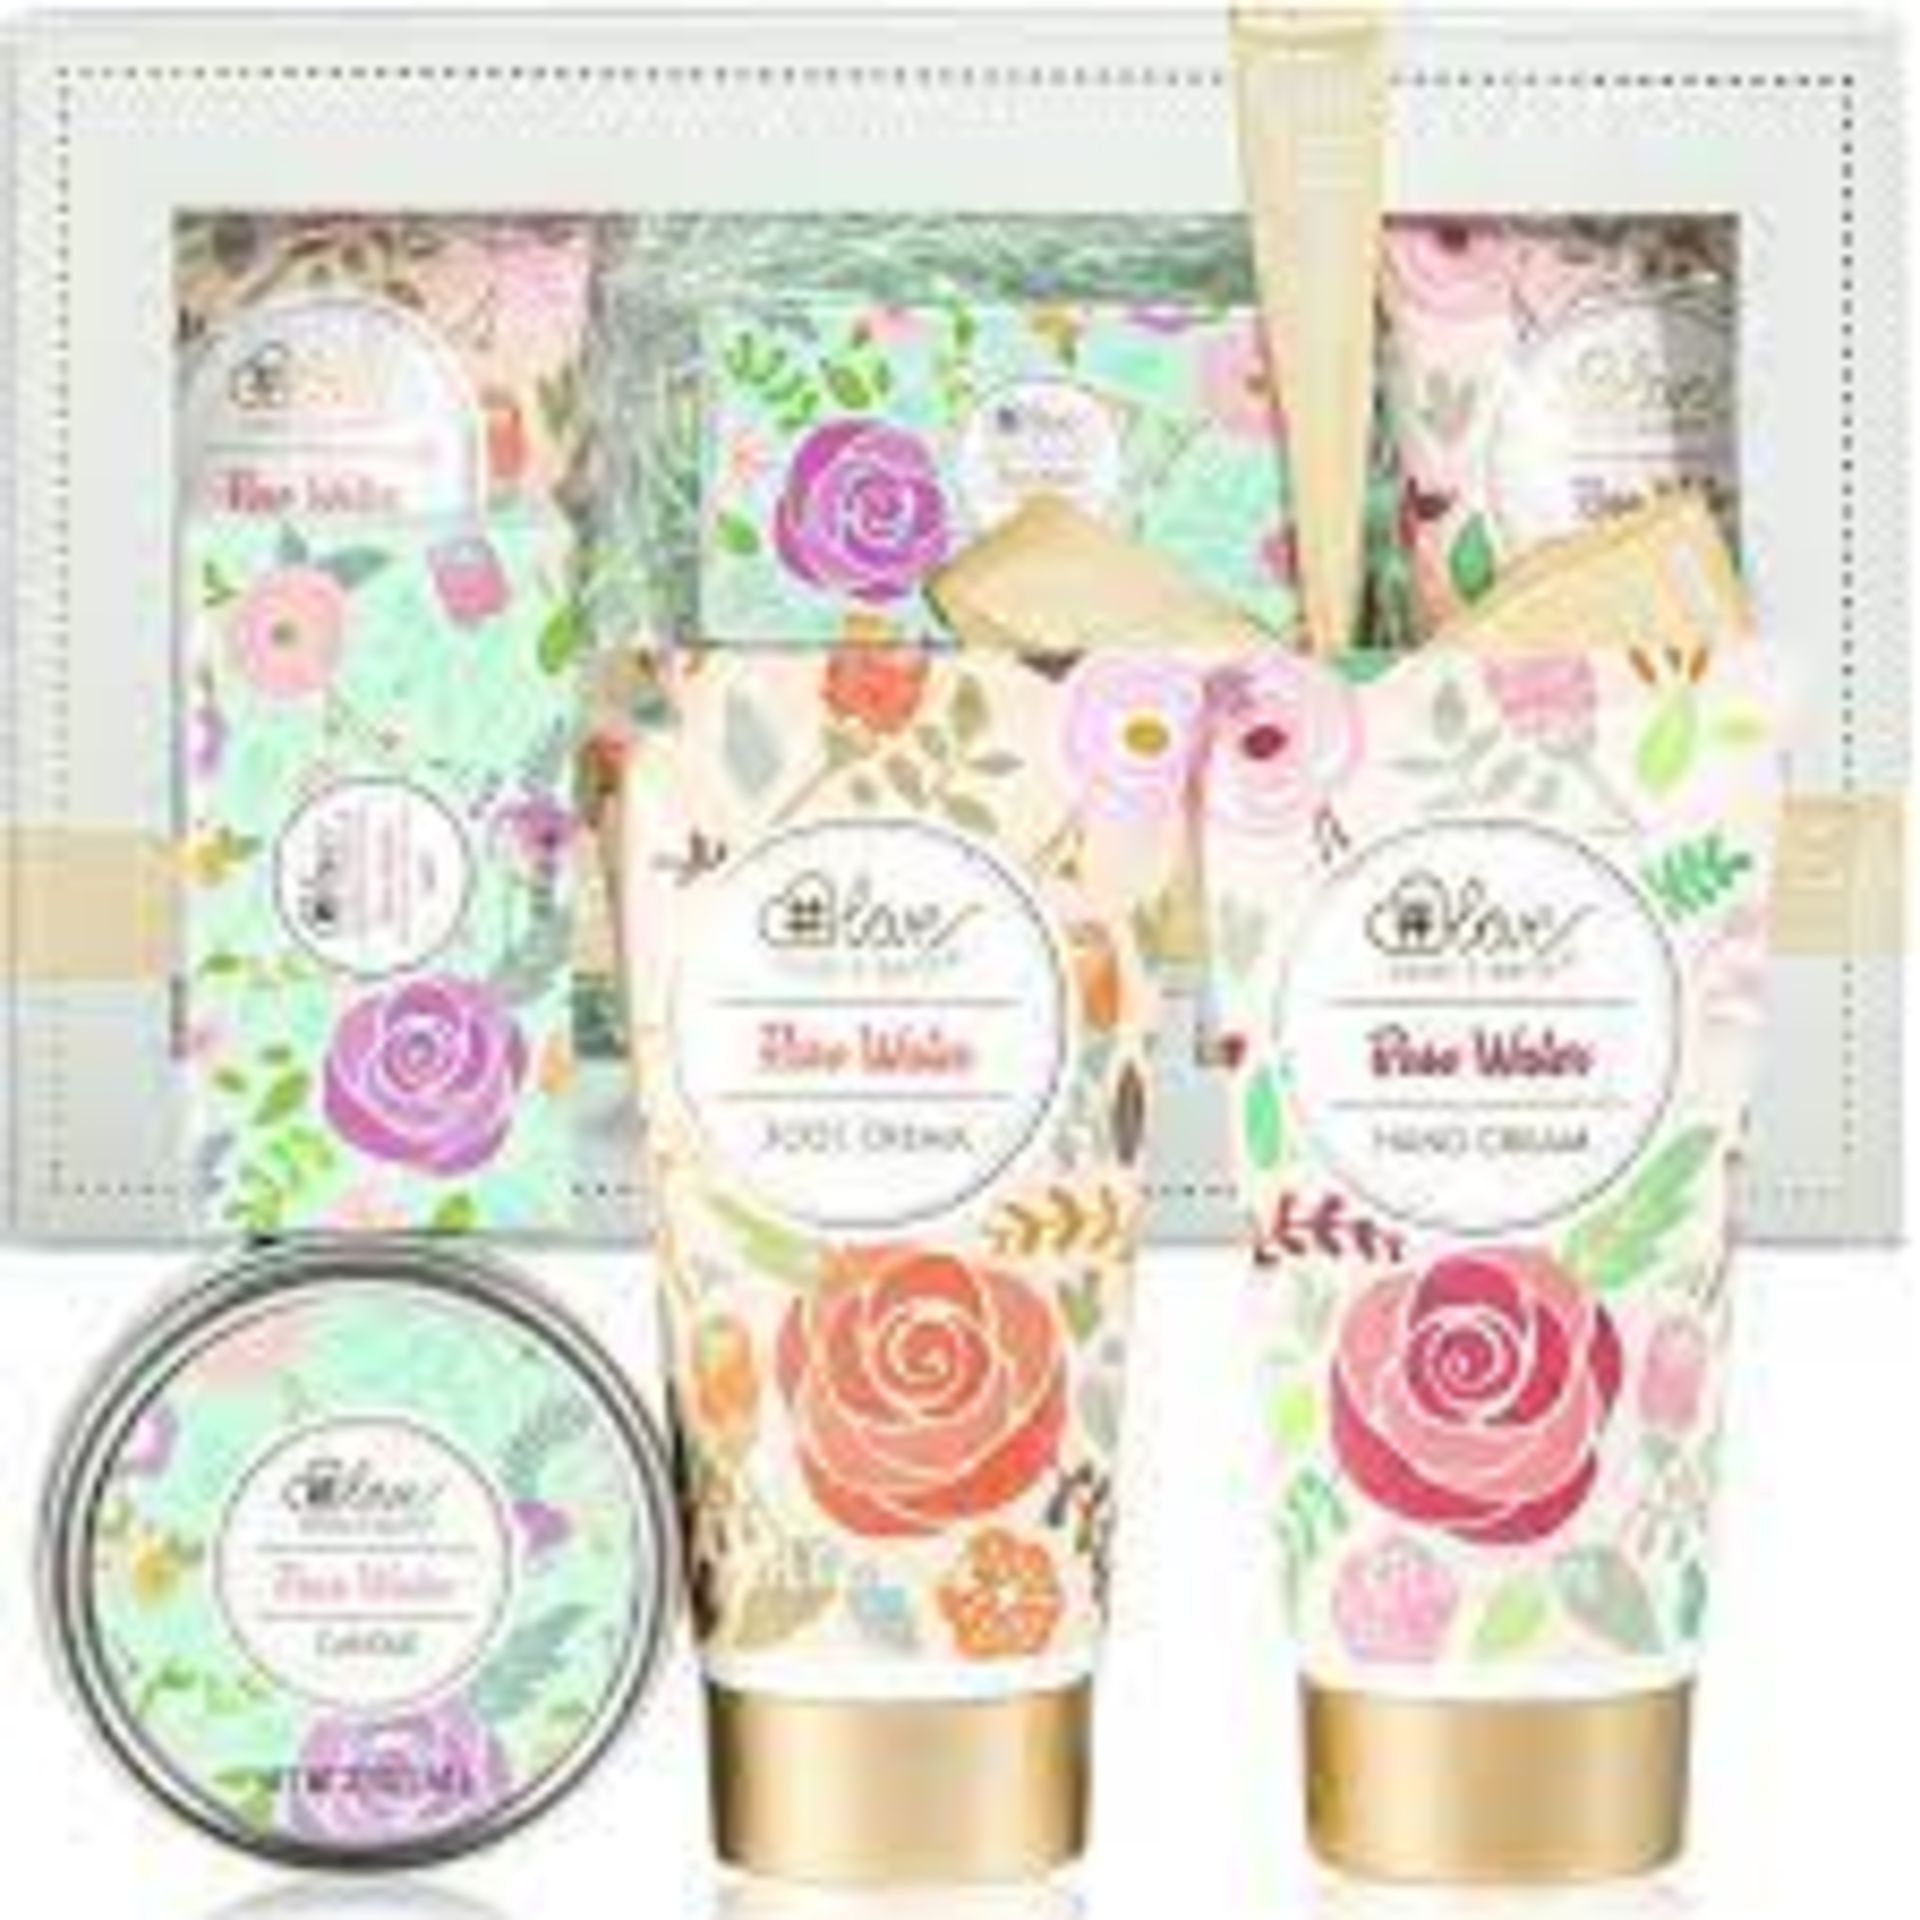 5 x NEW BOXED 4pcs Lotion Gift Set For Women. (BEL-HC-17). Self-Care Gift Set: including 4 travel-